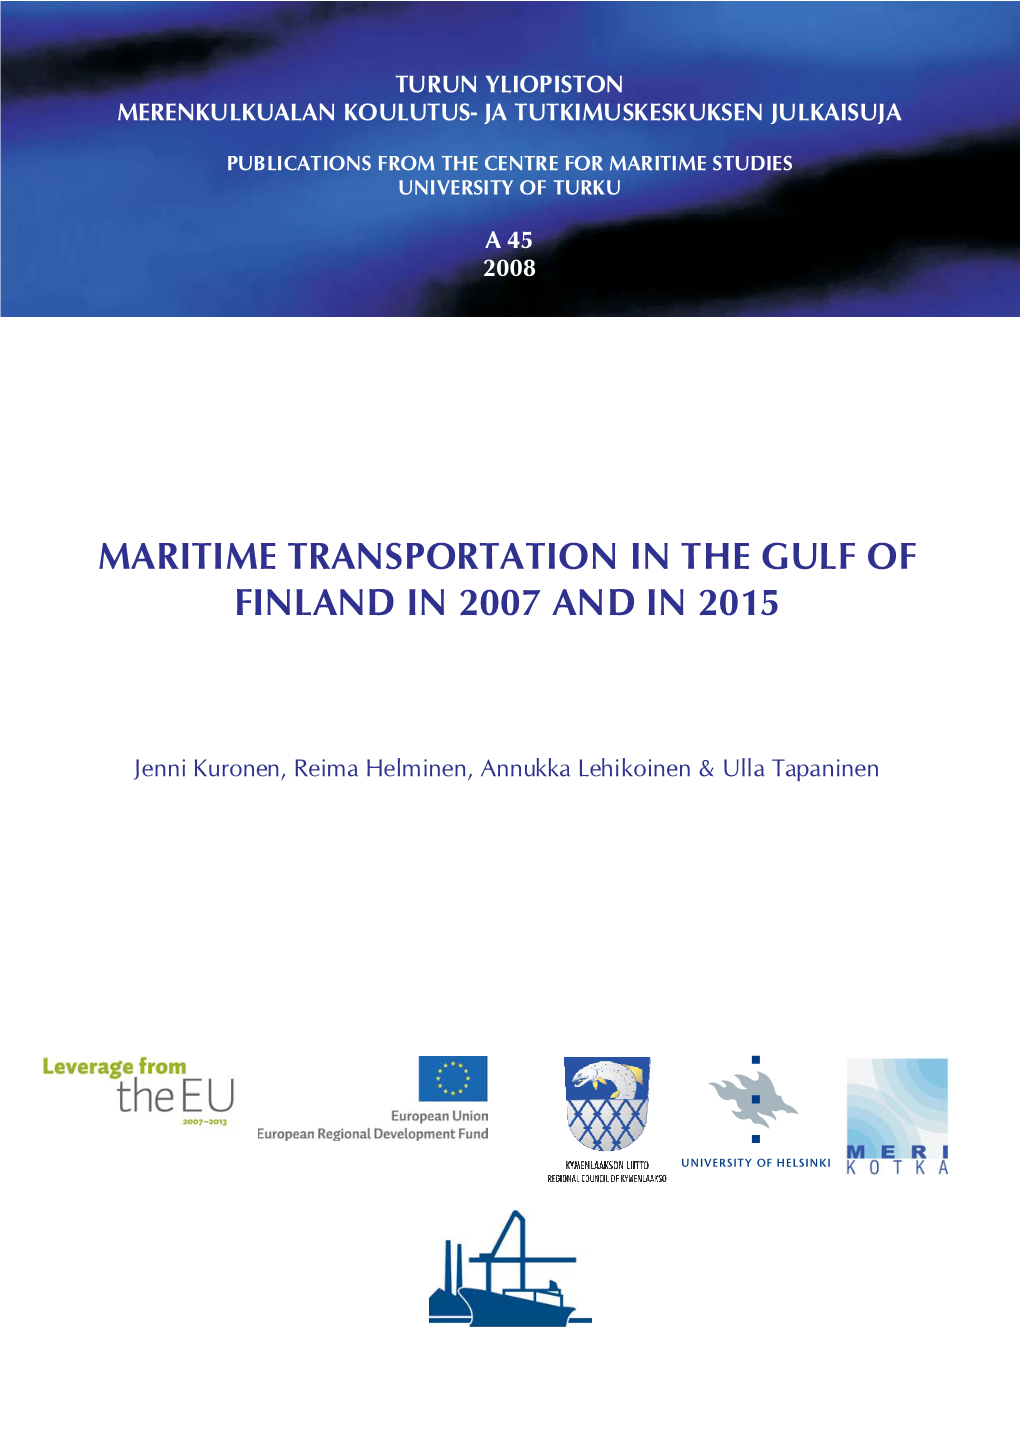 Maritime Transportation in the Gulf of Finland in 2007 and in 2015